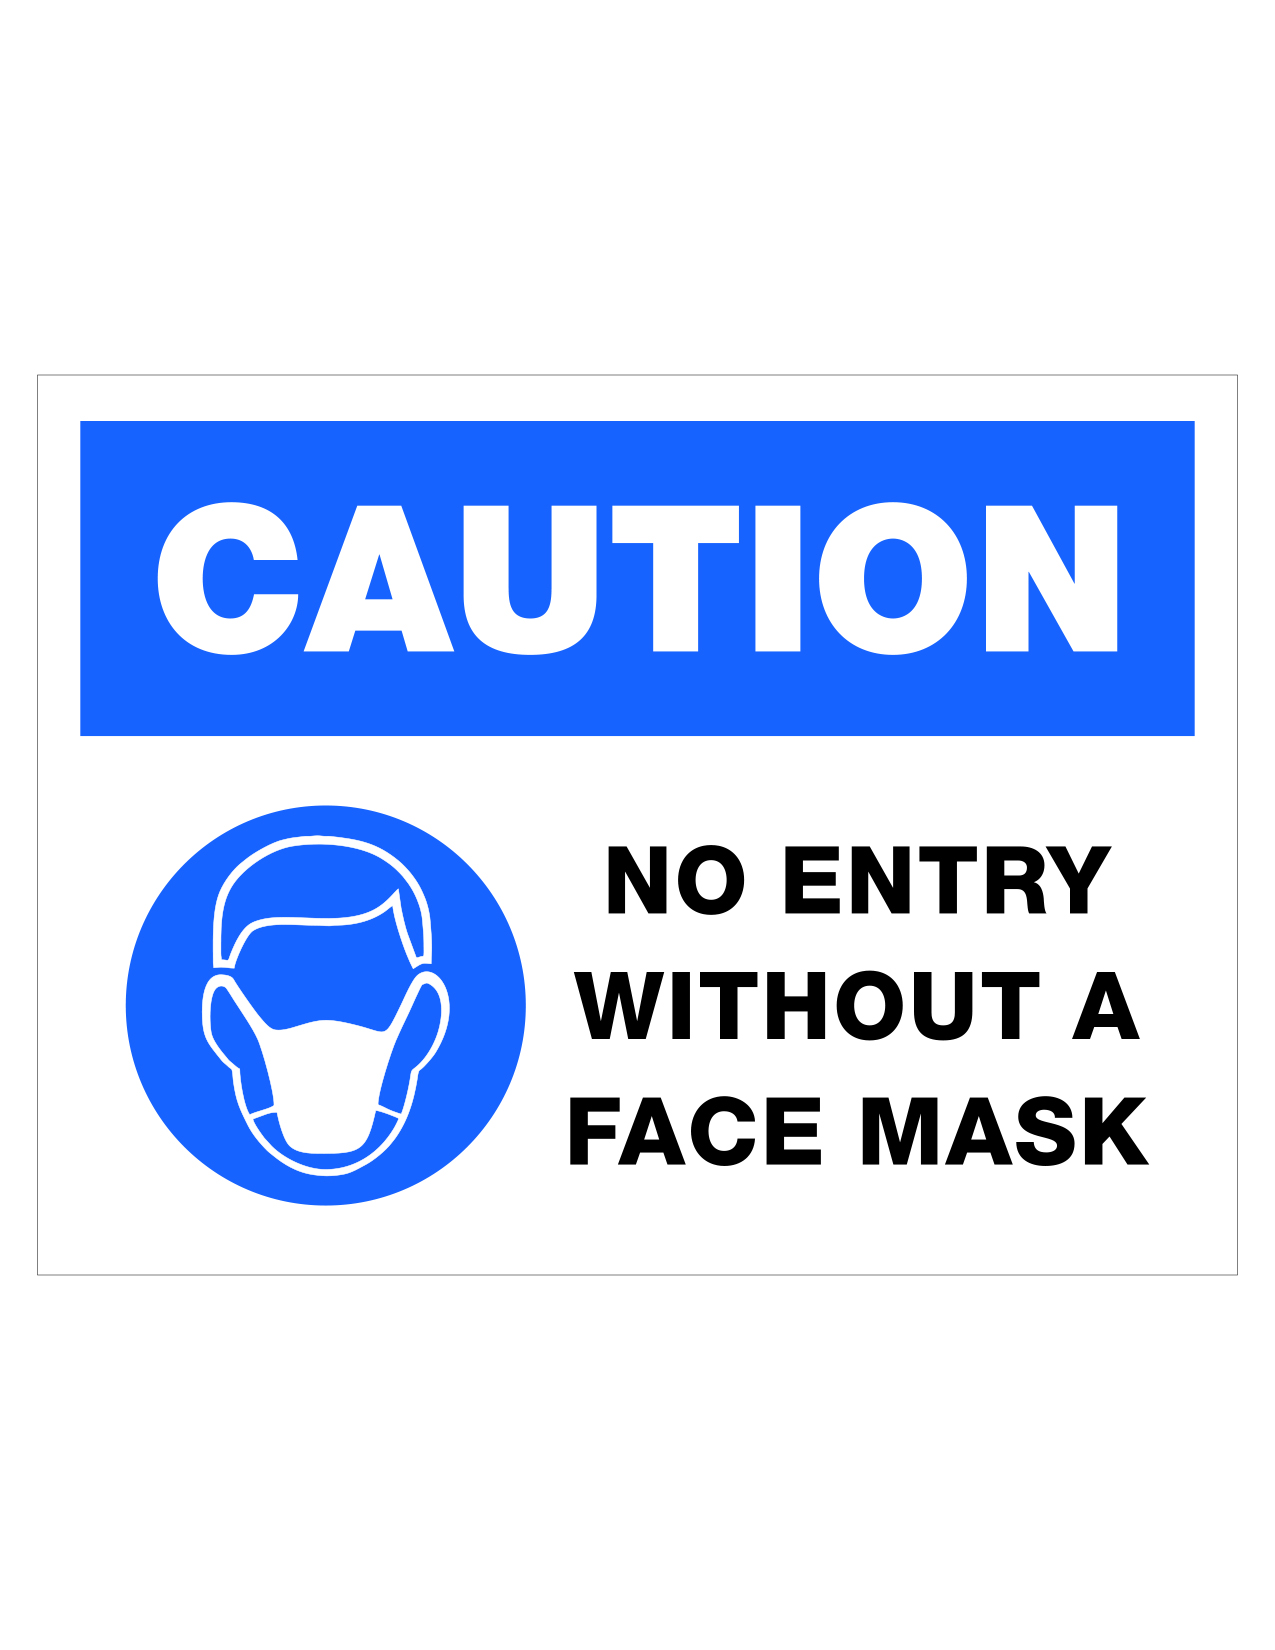 No Entry without Face Mask- - 6 Pack: 8" x 6" Decal for Smooth Surfaces